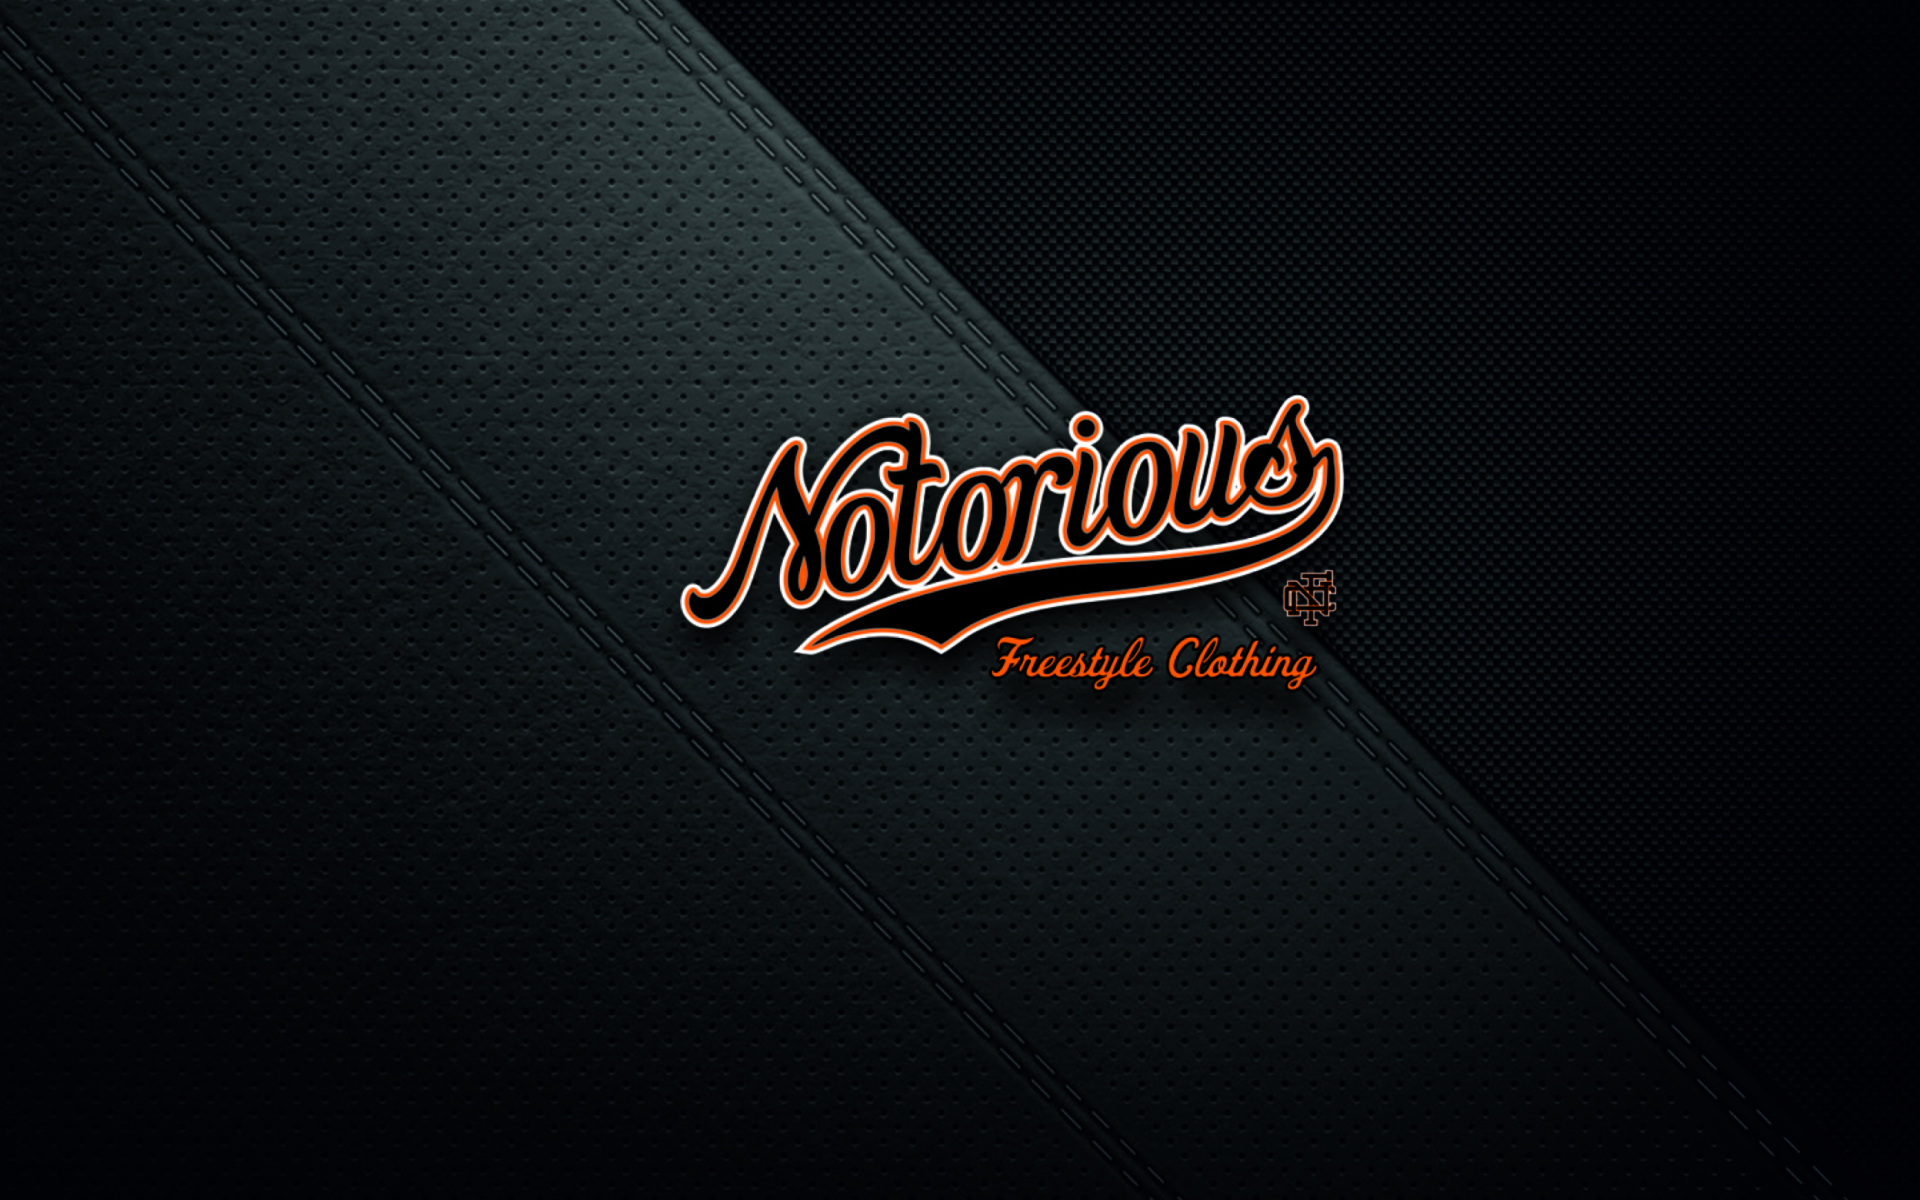 Notorious Freestyle Clothes wallpaper 1920x1200